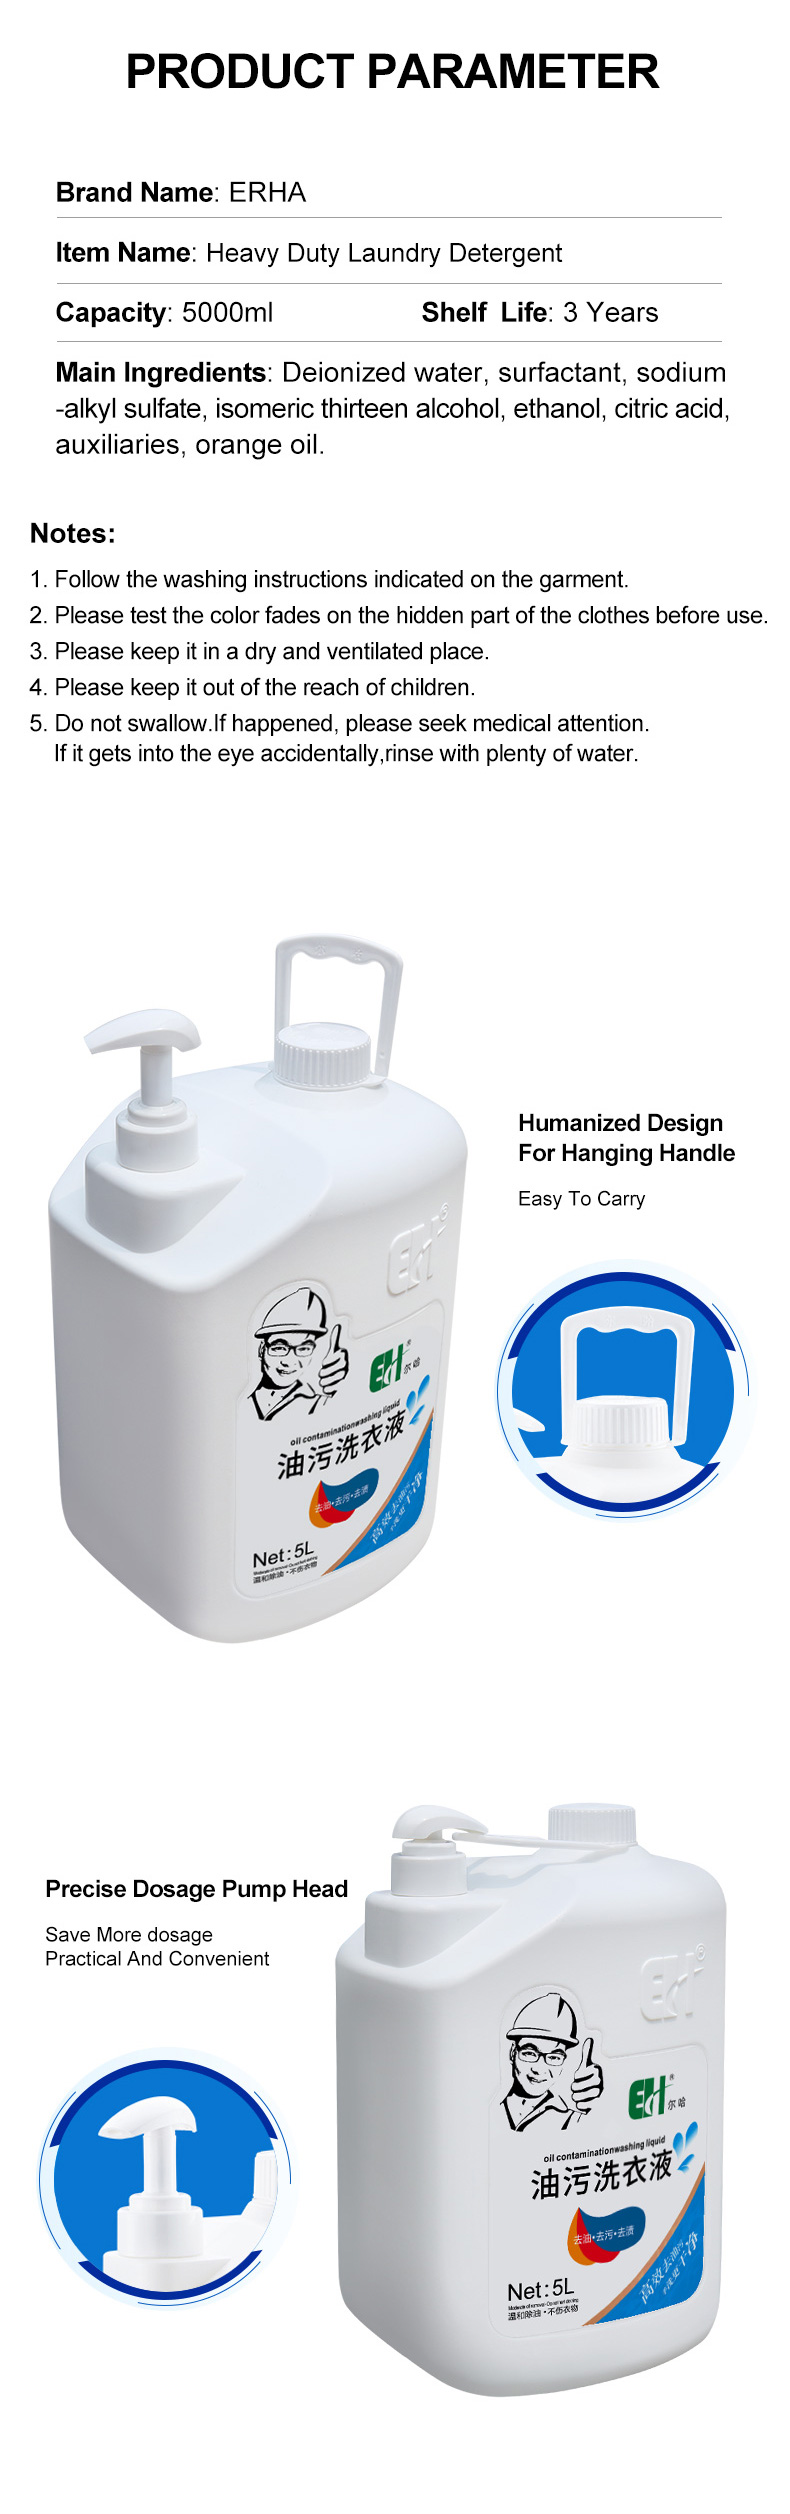 The product parameter of 5L Laundry Detergent